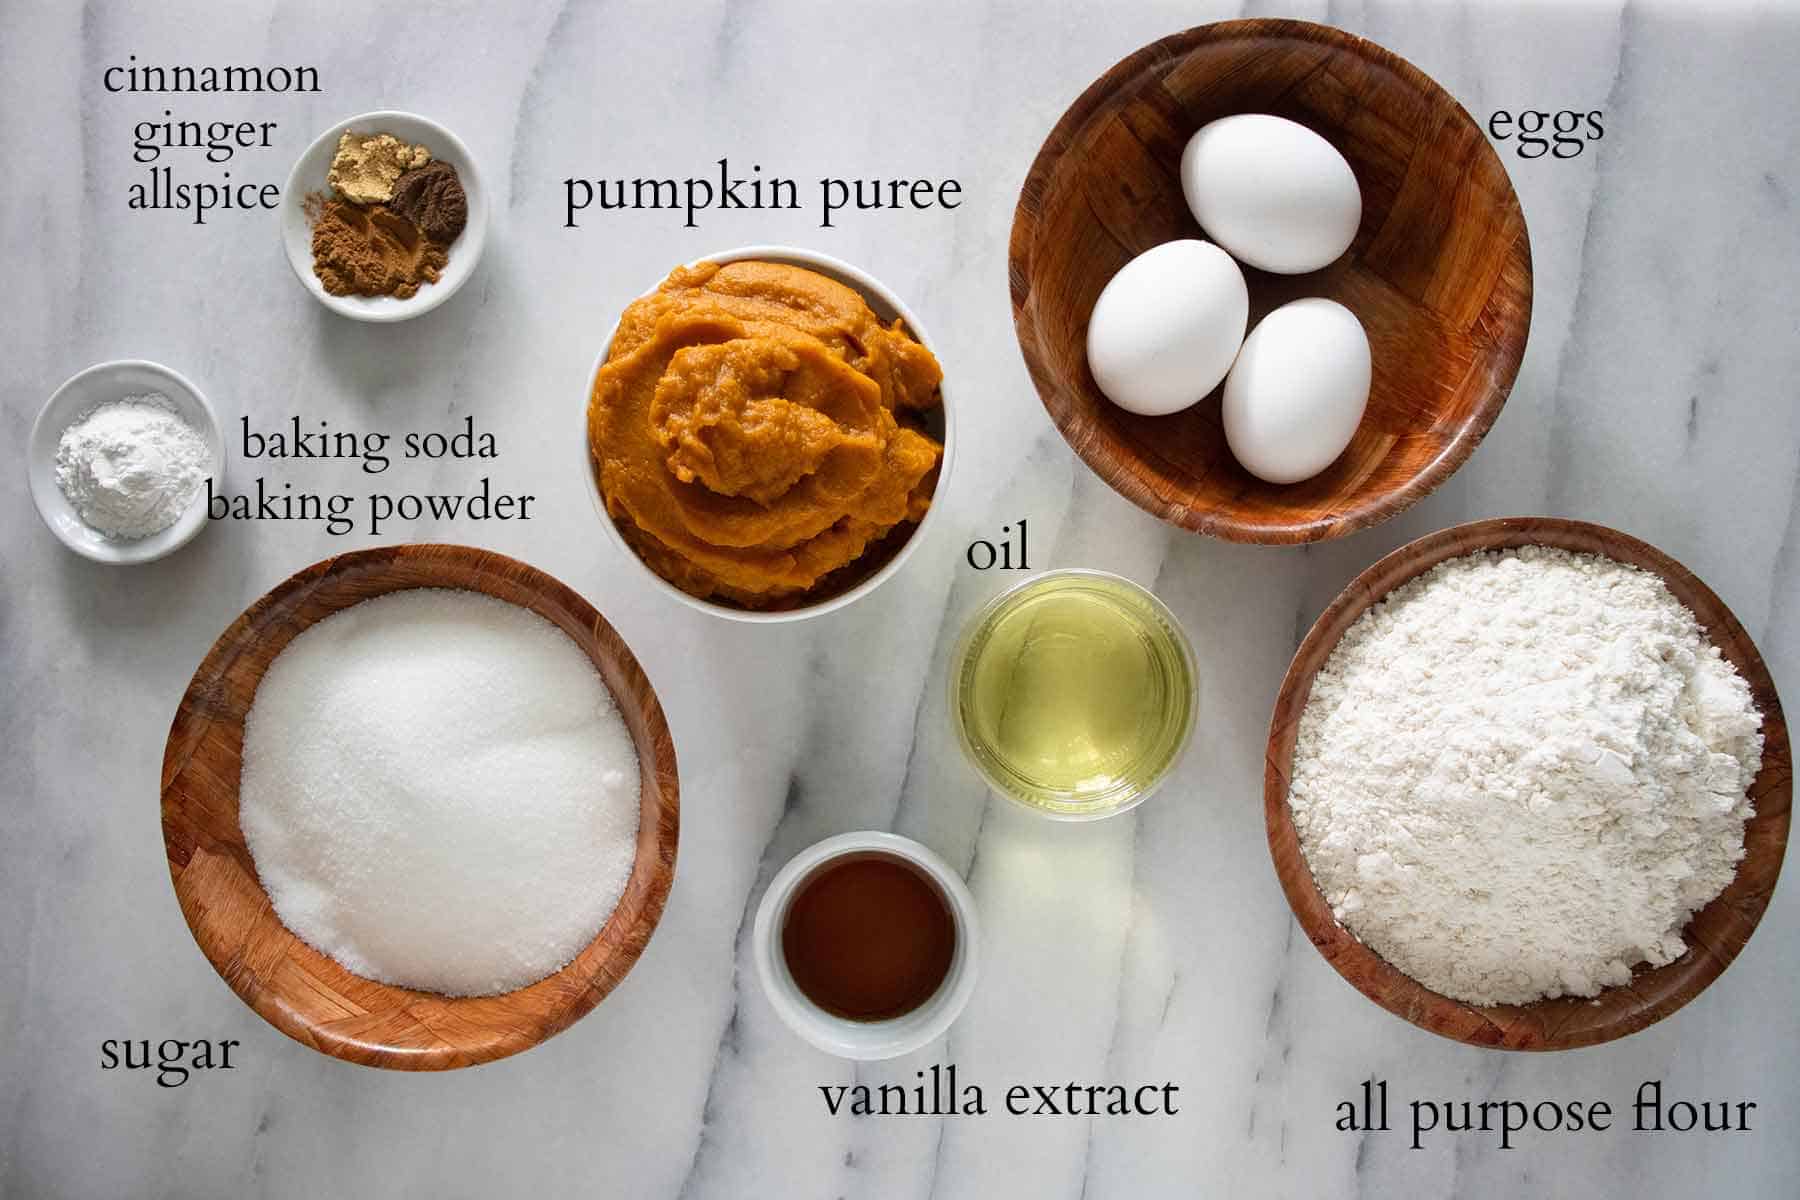 all the ingredients needed to make a pumpkin loaf cake.